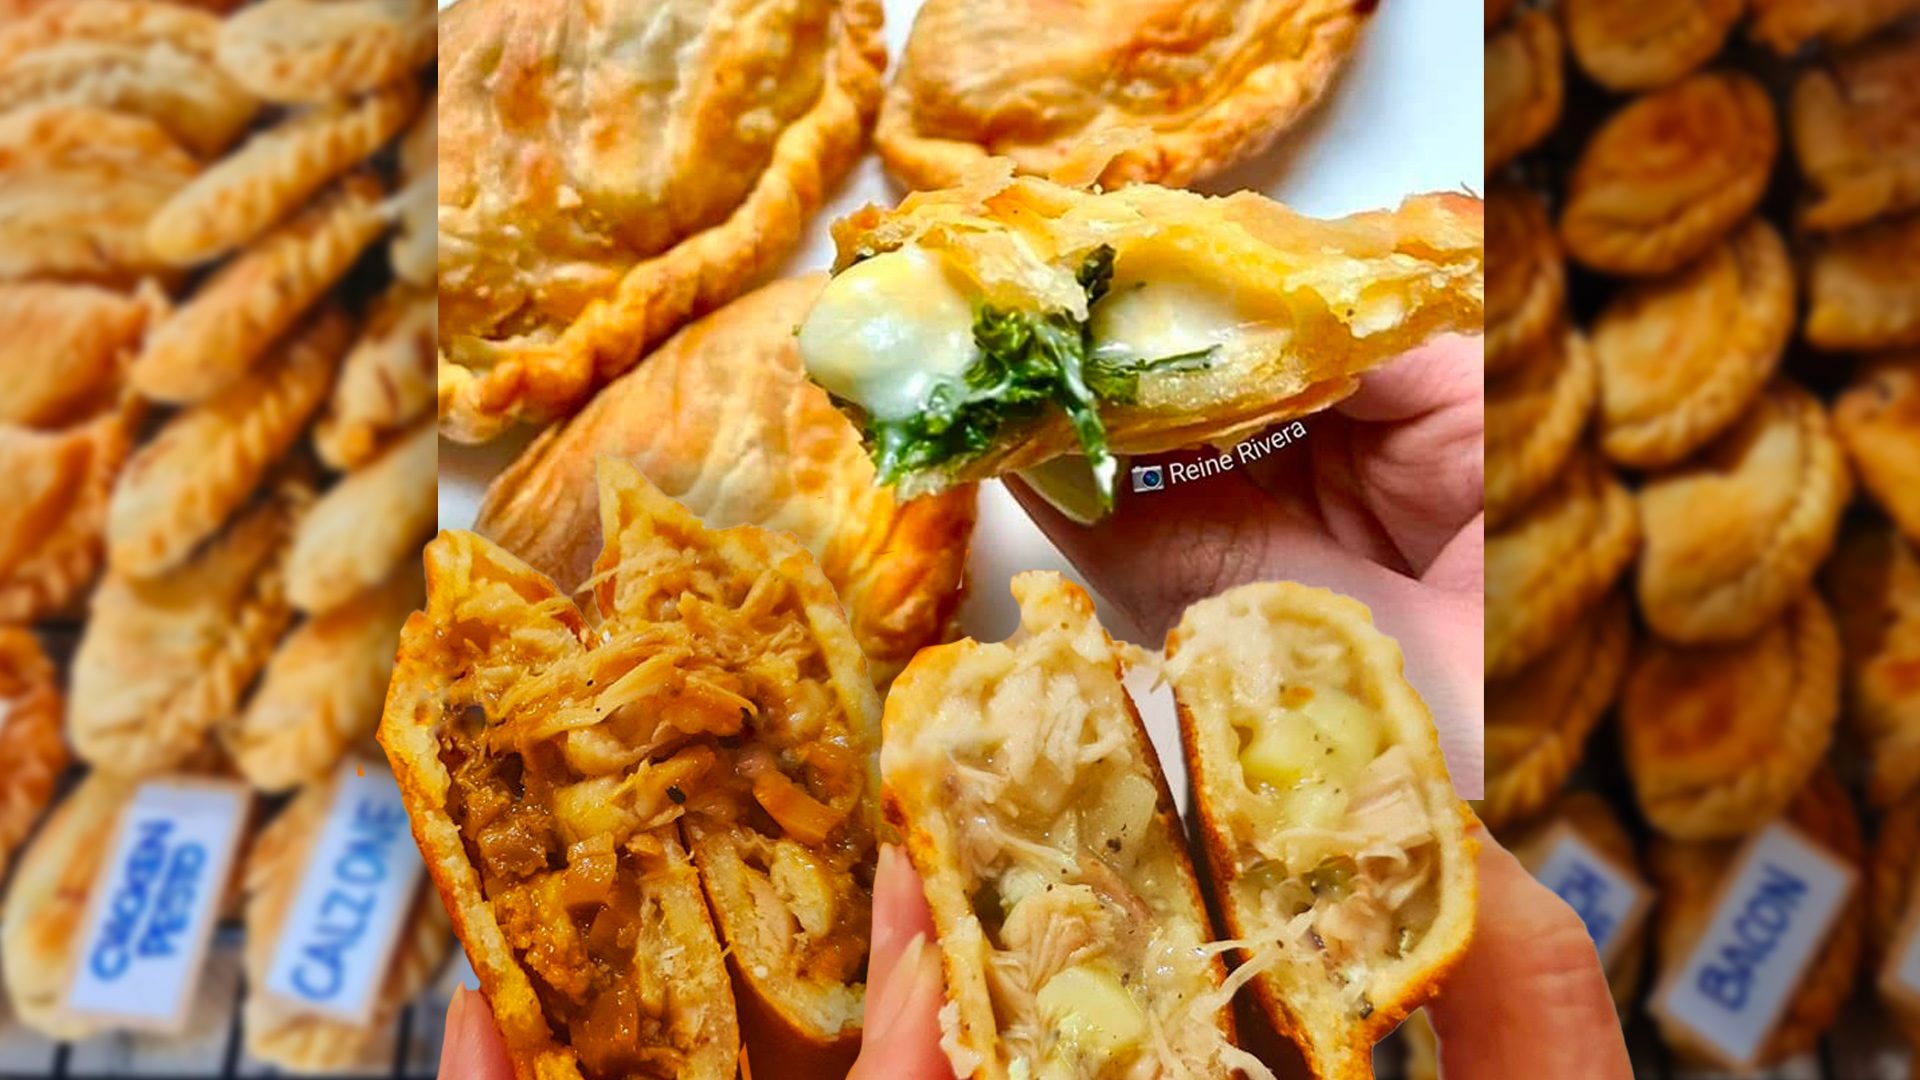 This Antipolo bakery’s flaky homemade empanadas come in over 30 flavors